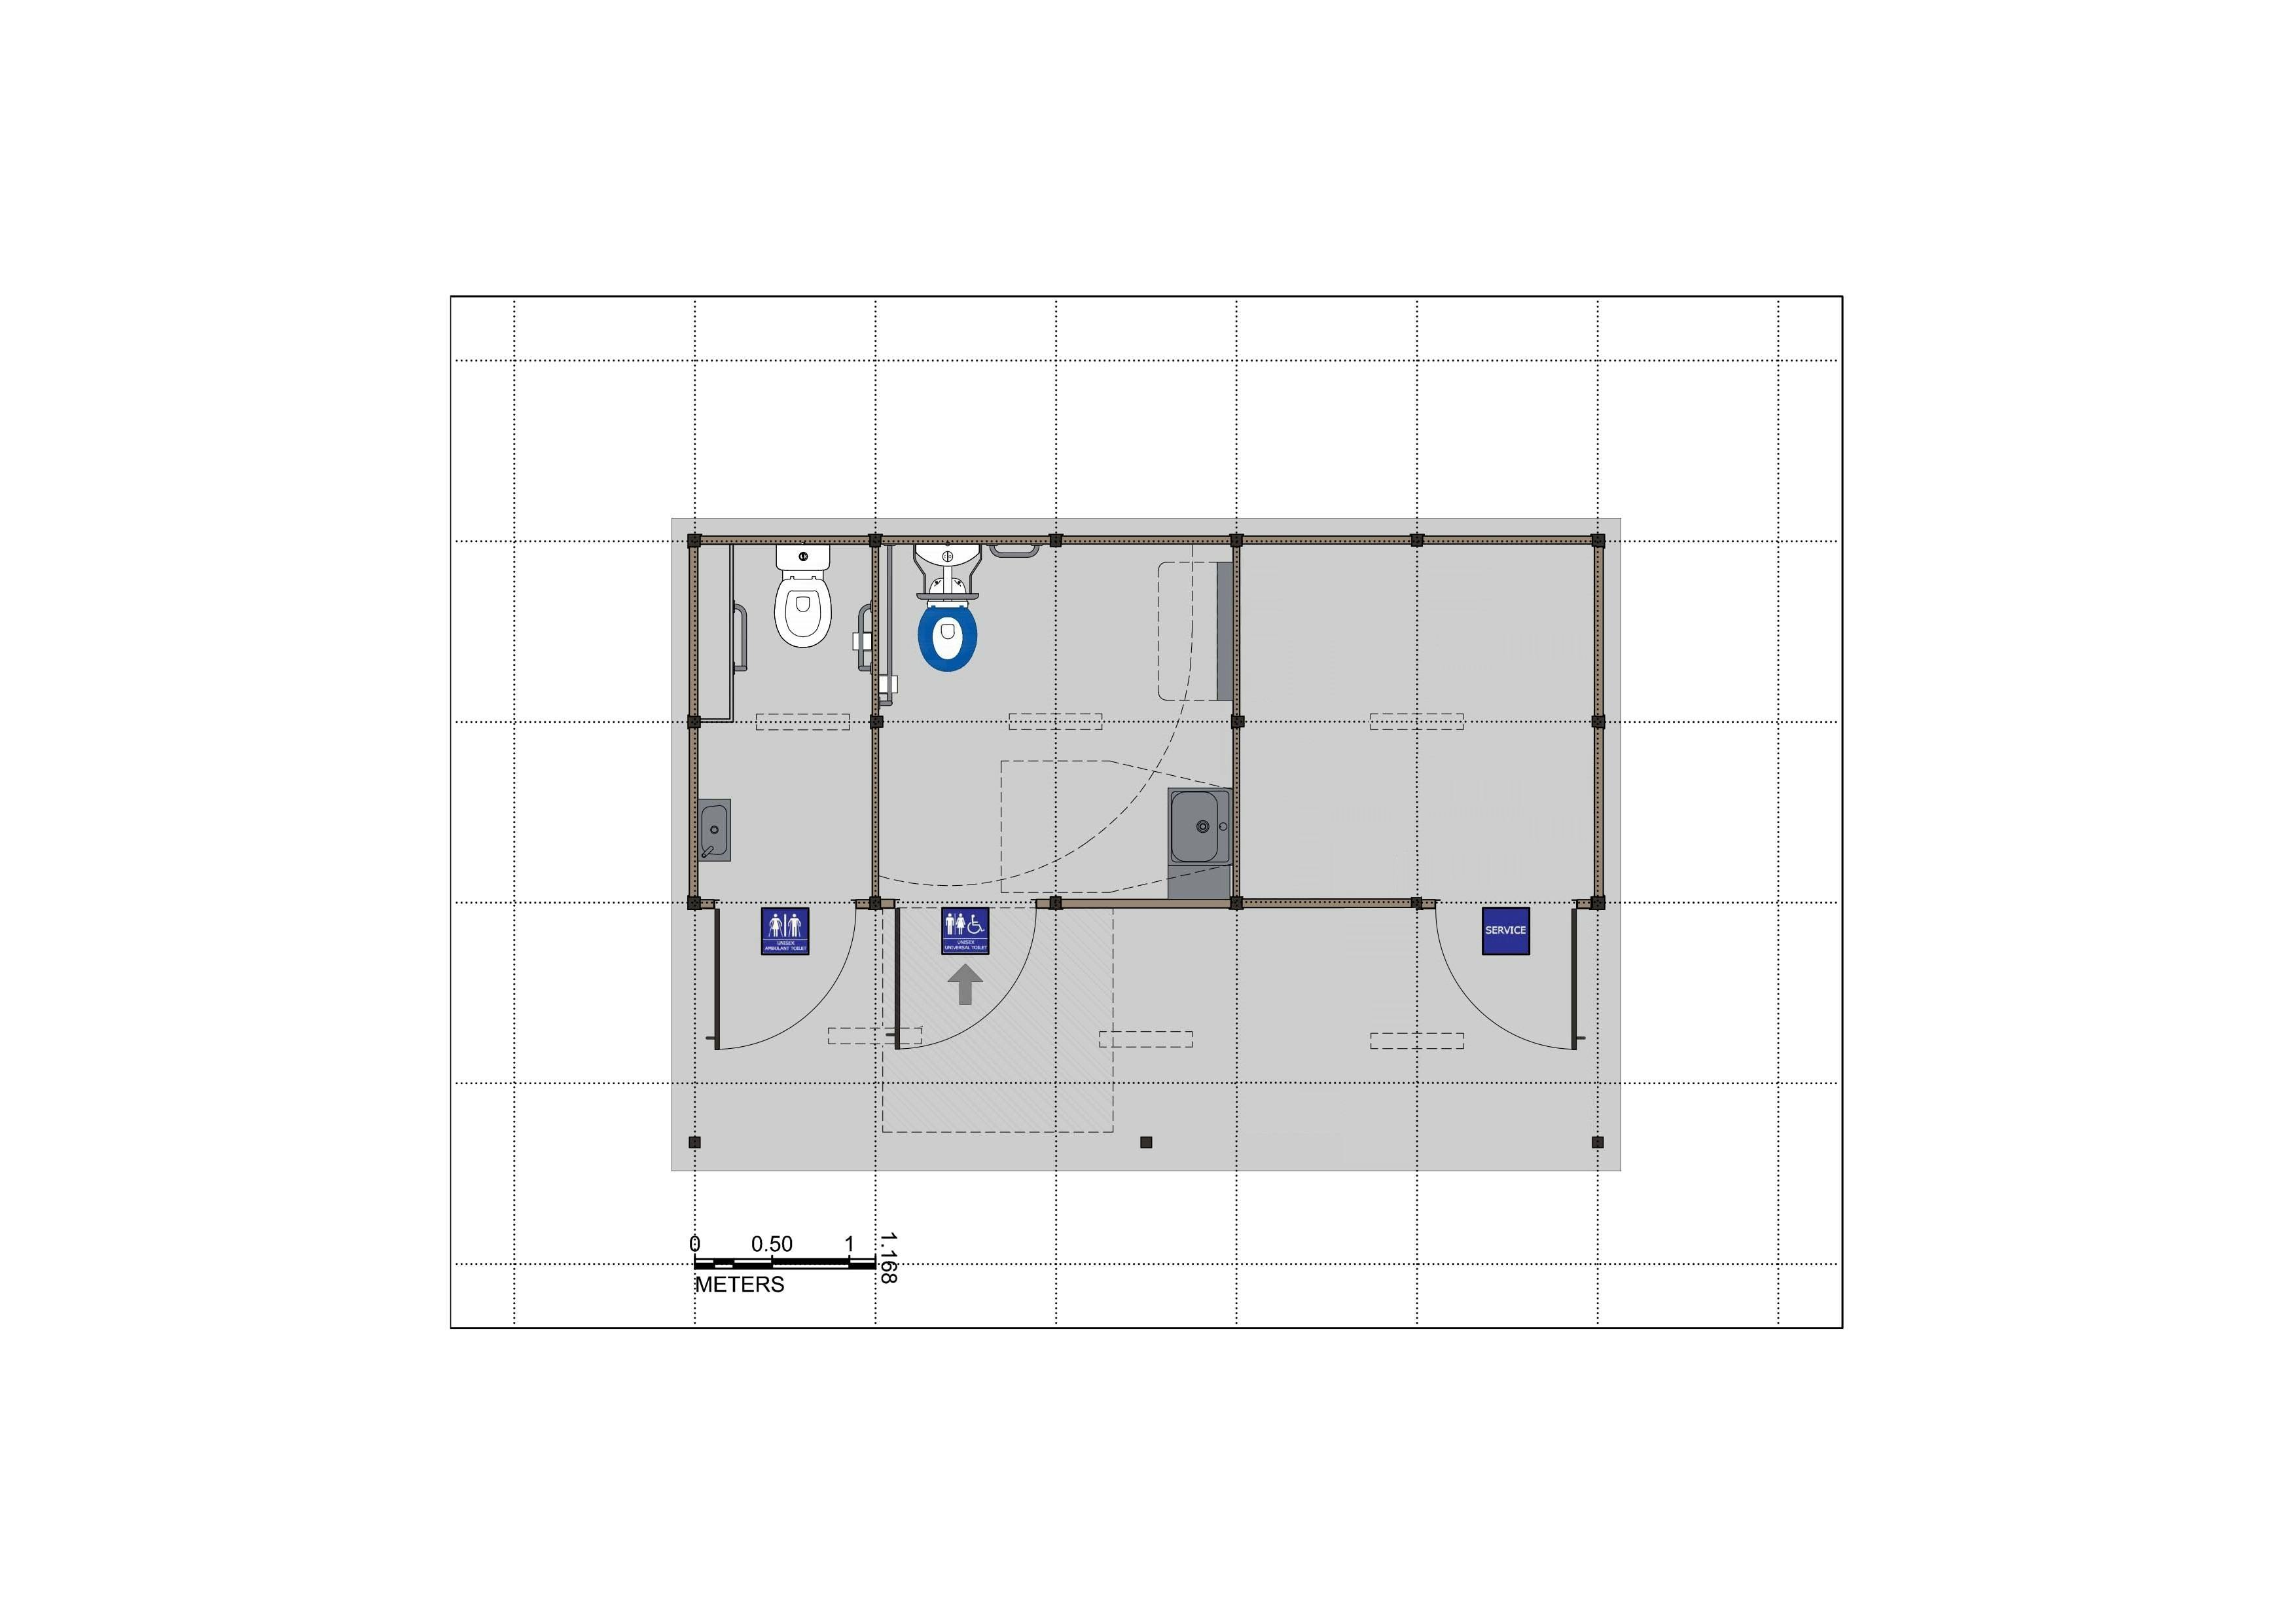 The floor-plan of the  proposed permanent public toilet with storage room, Wynn Vale Oval 